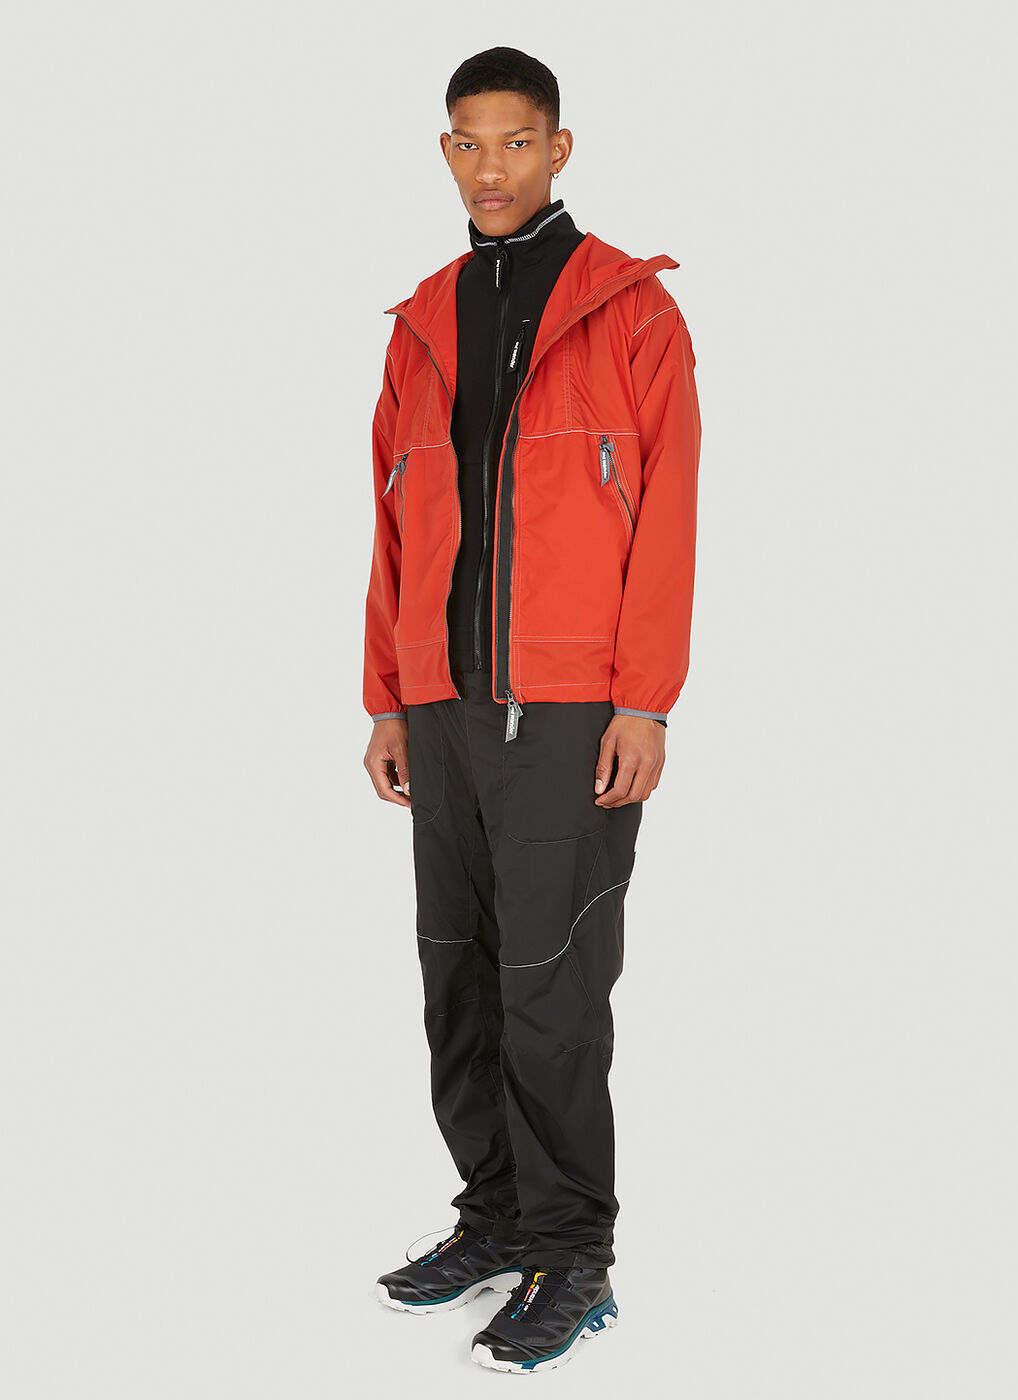 Pertex Wind Jacket in Red and Wander